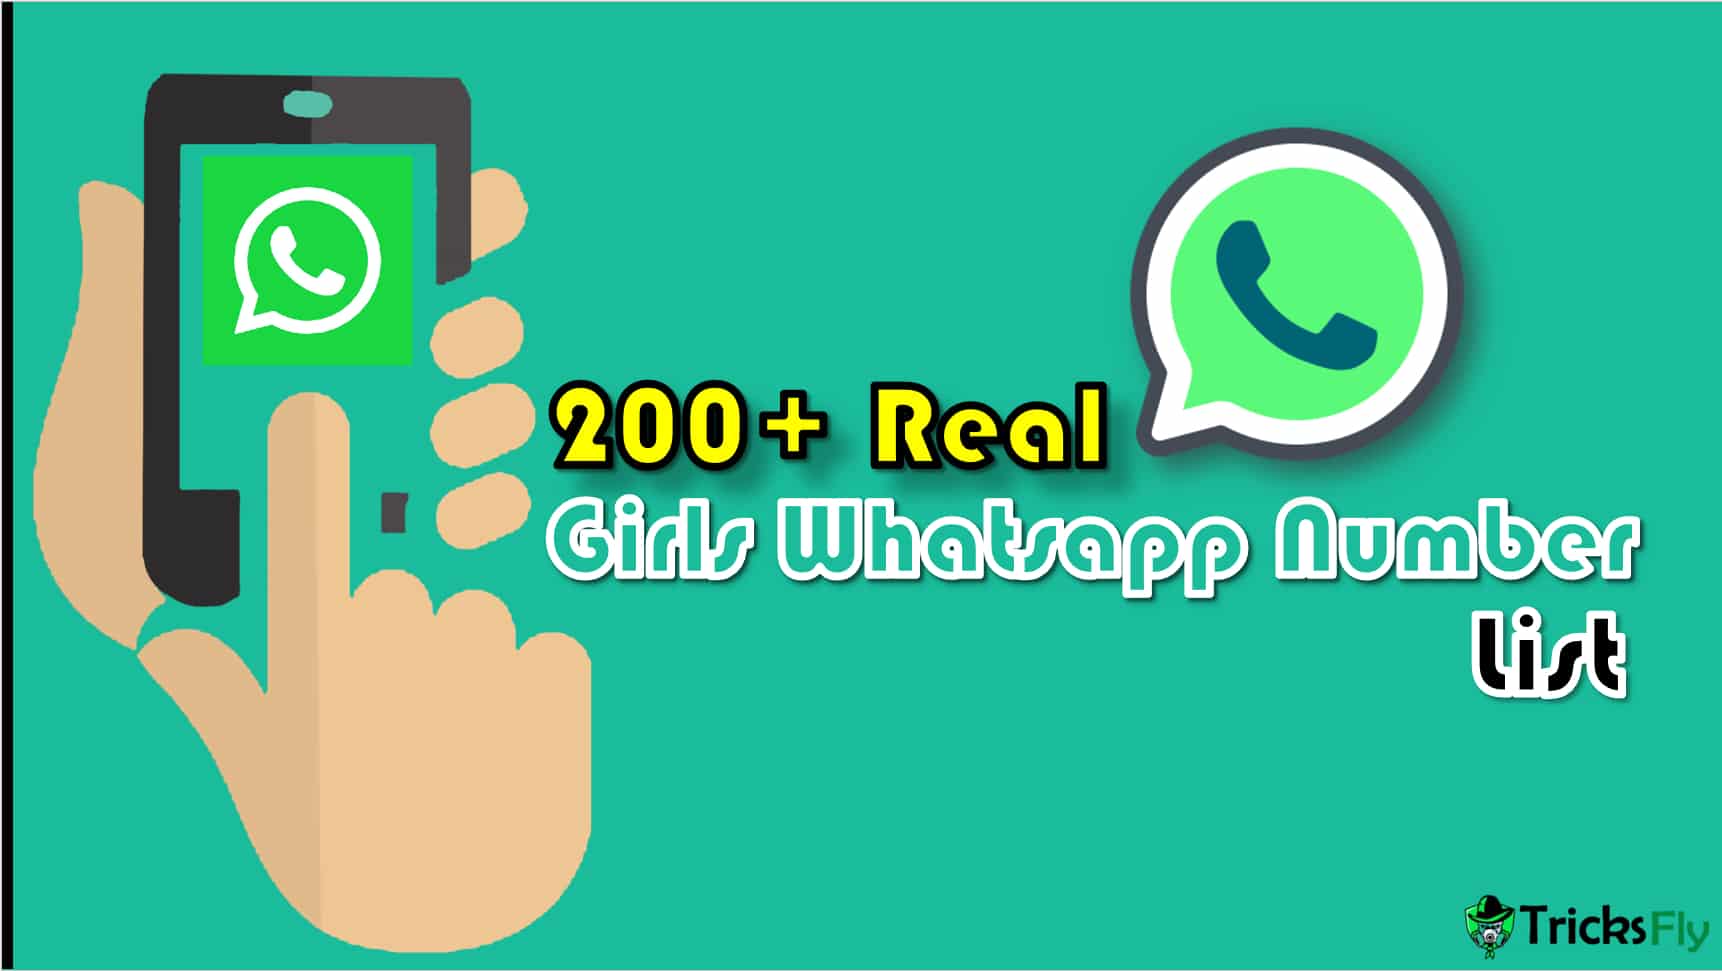 499+ Real Girls Whatsapp Numbers List for Friendship in 2022.